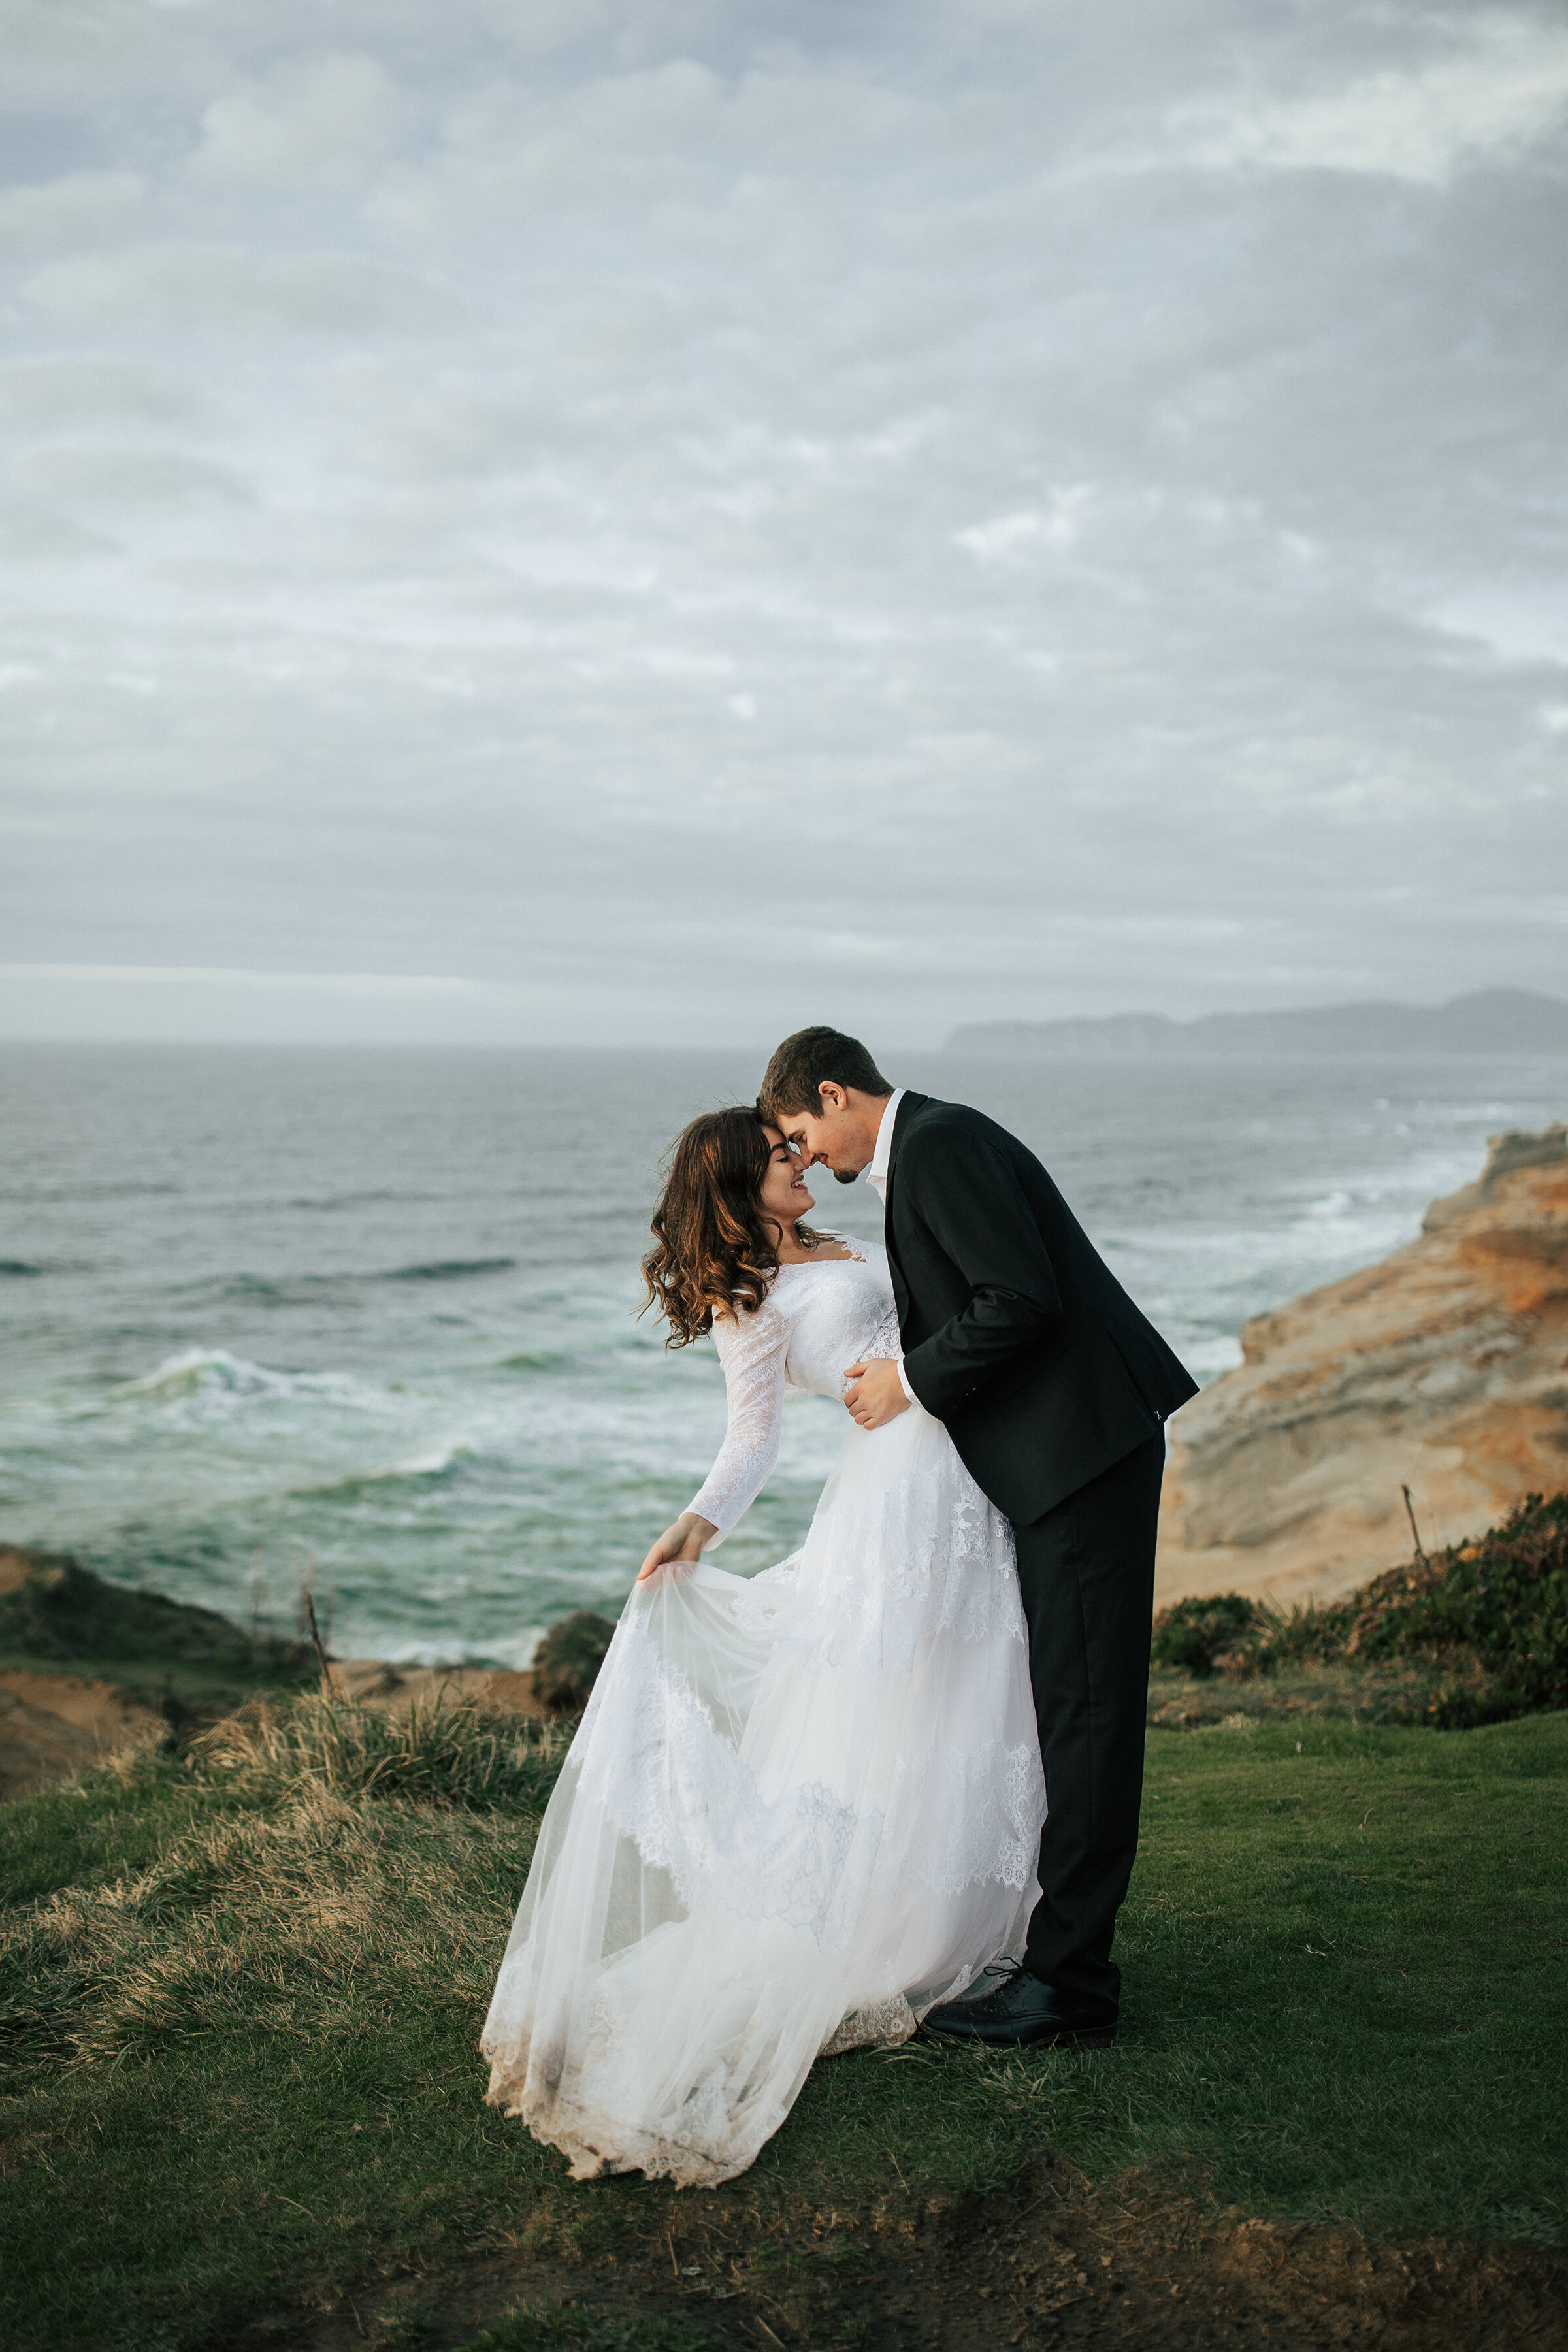  A newly eloped couple dance on the Oregon Coast in a stunning and romantic elopement photo shoot by Emily Jenkins Photography. Romantic wedding dress inspiration elopement attire inspiration ideas and goals couple goals couple pose inspiration ideas